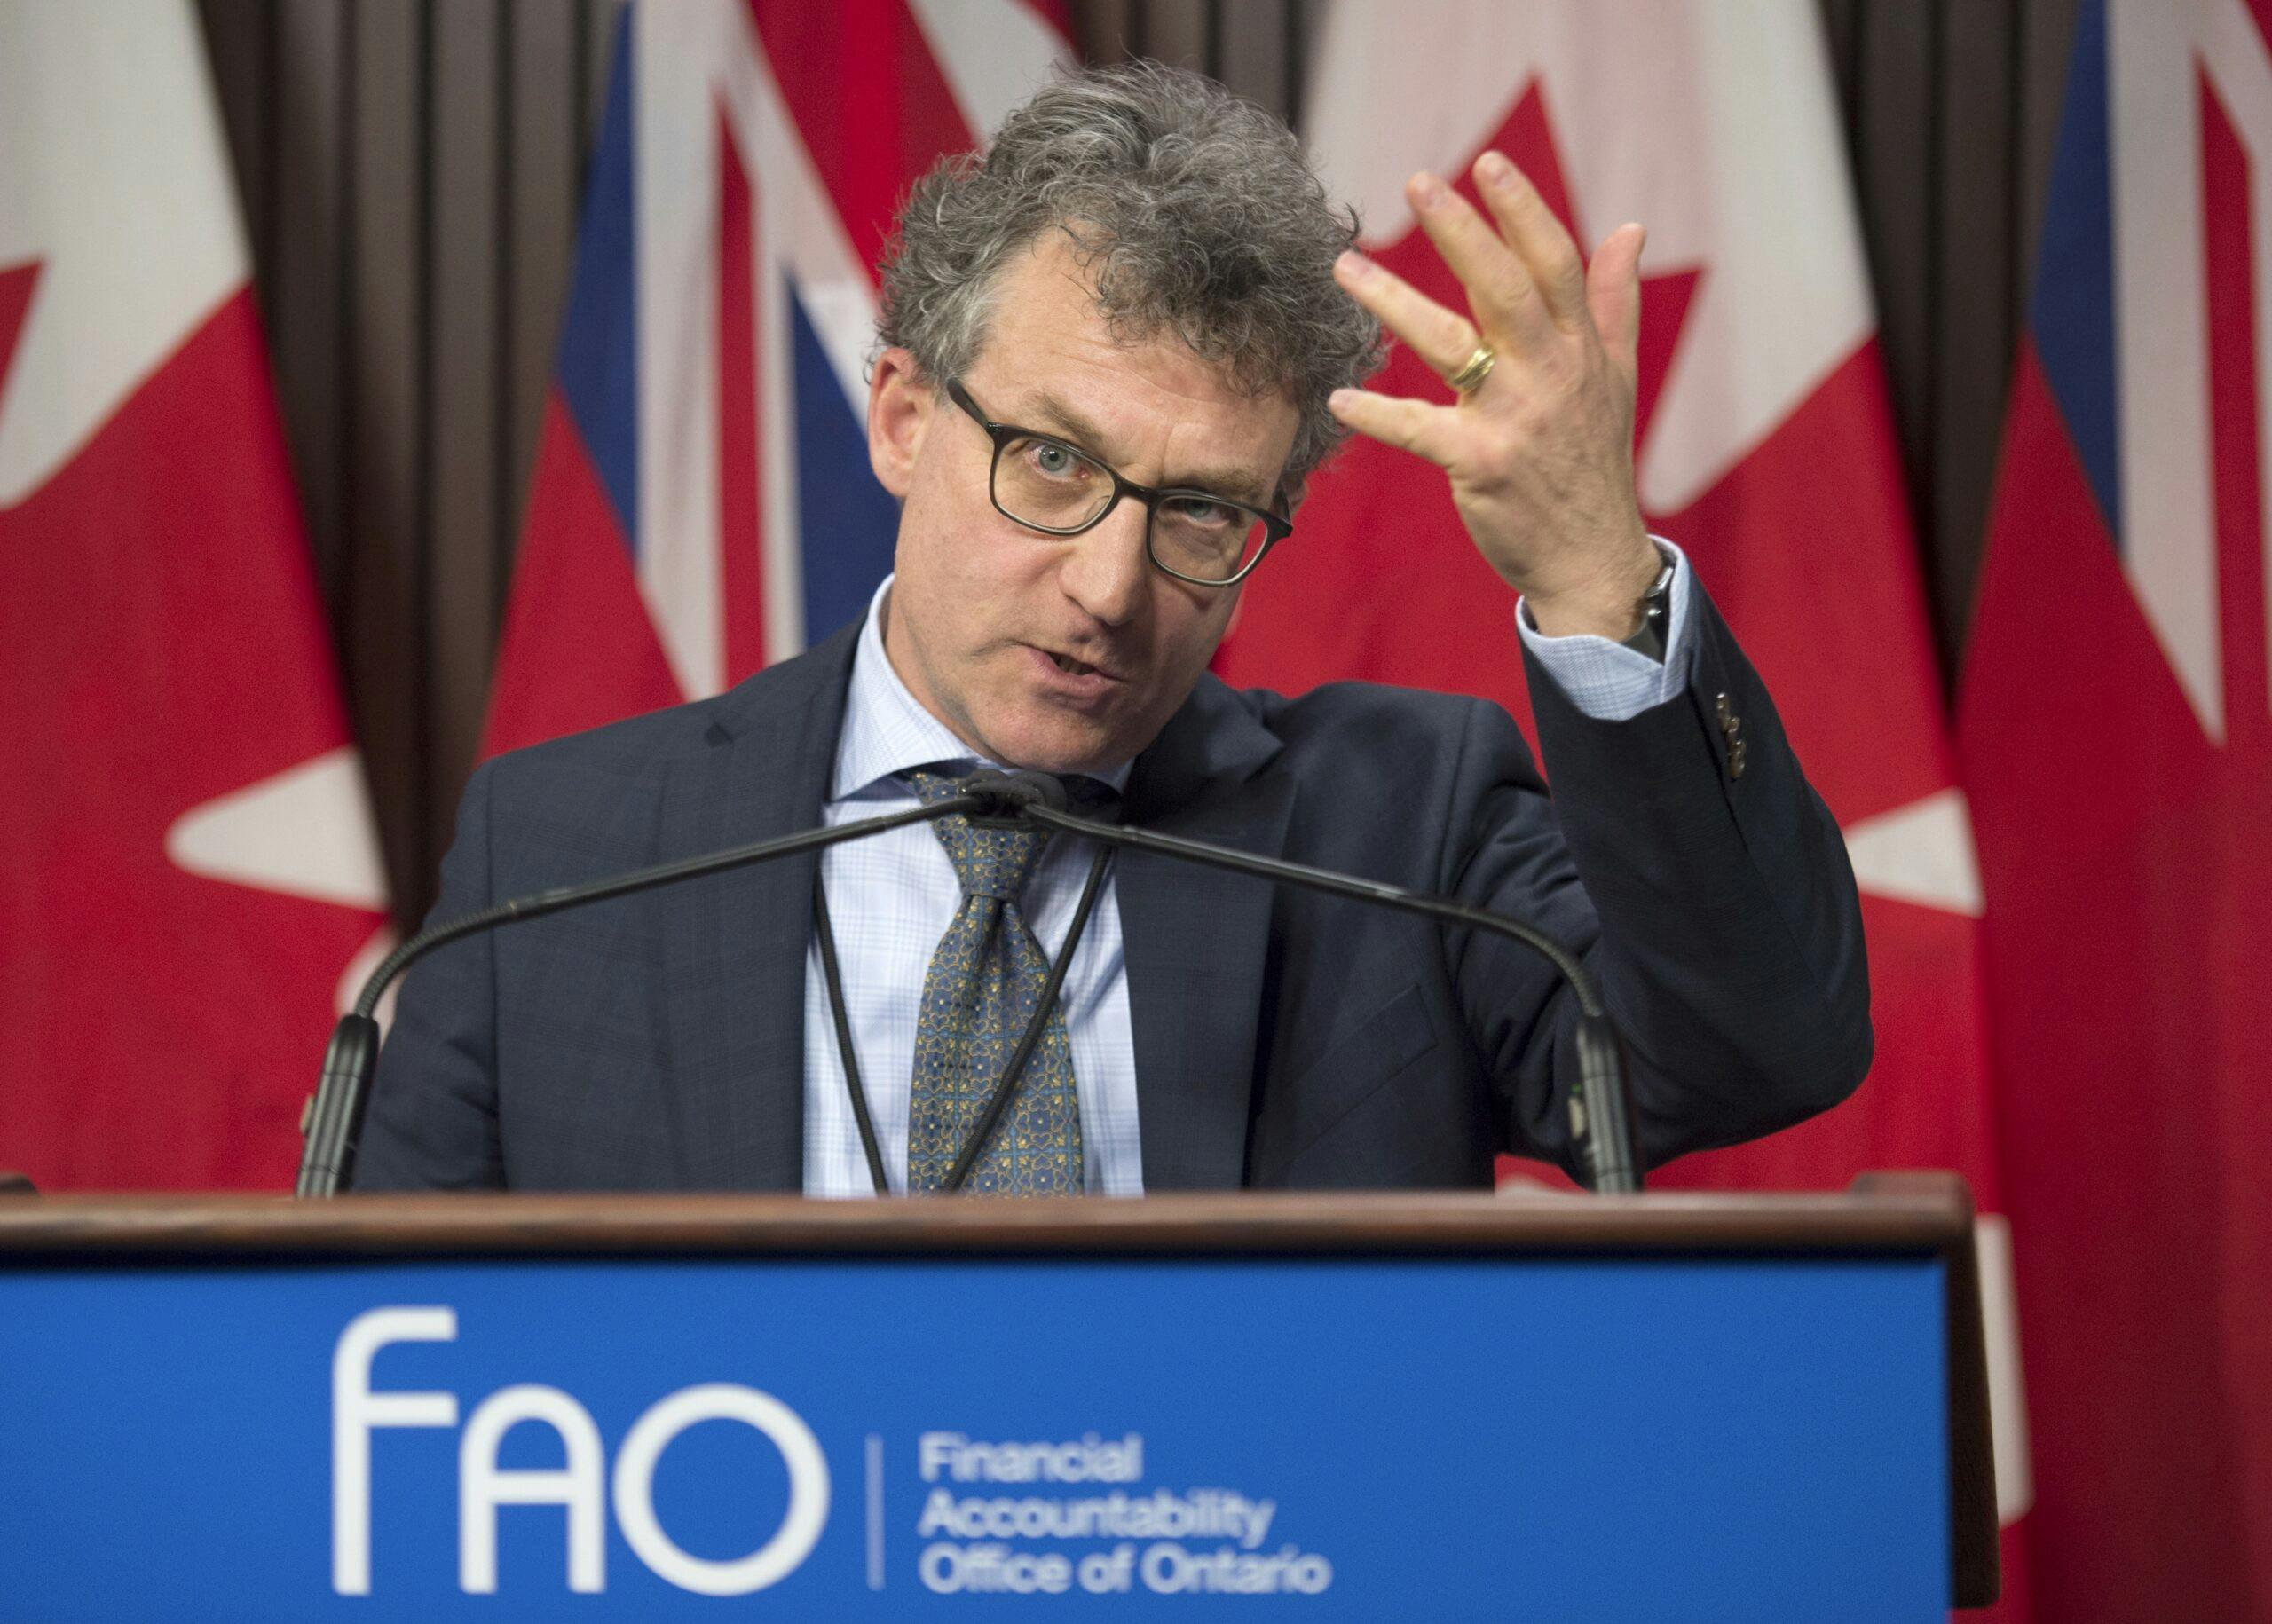 Province spent $800 million less than planned in first quarter